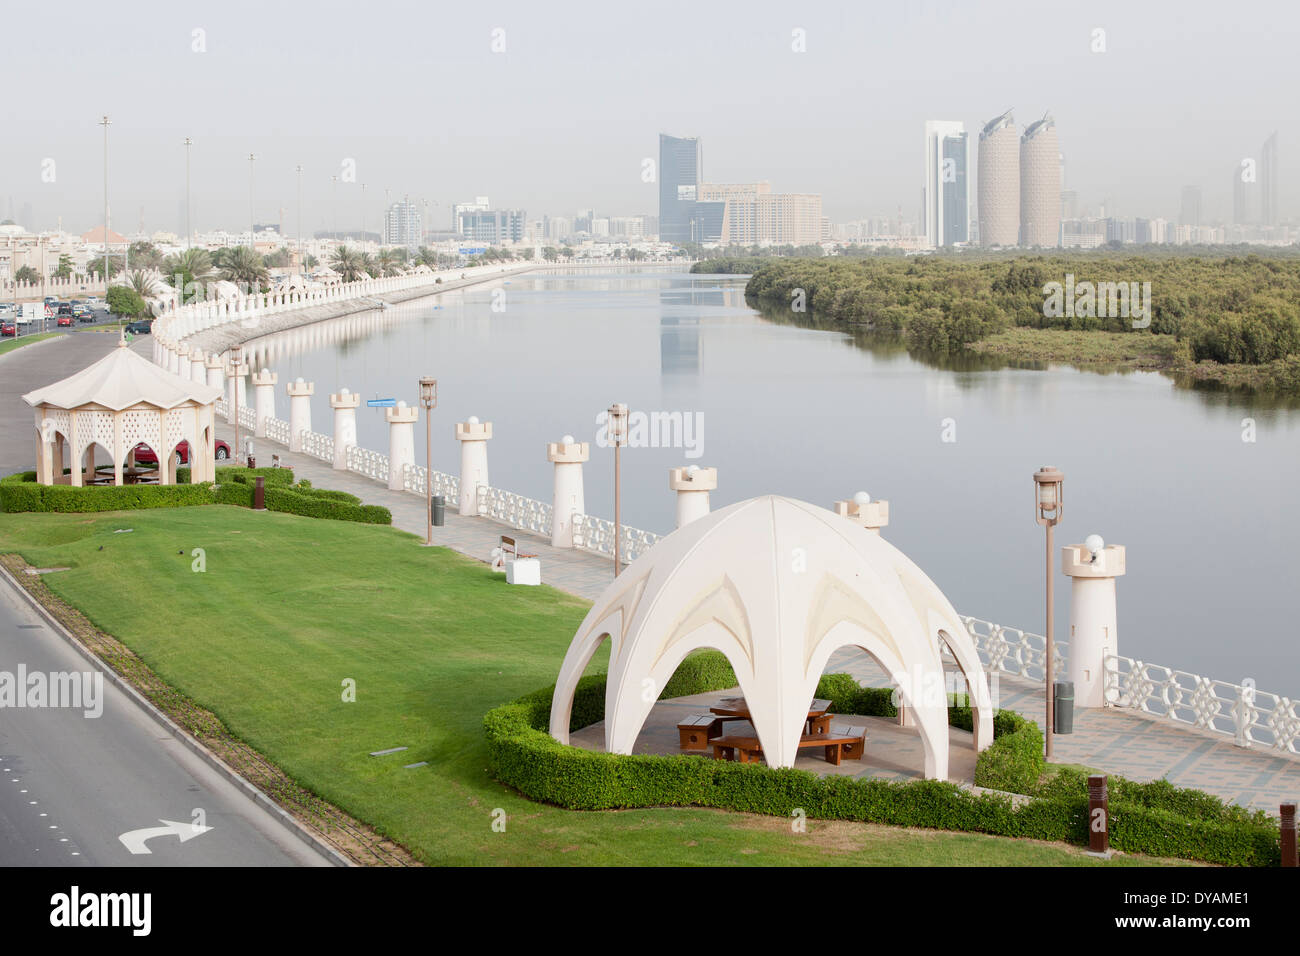 A walkway and park along Al Salam street, and the mangroves with the city of Abu Dhabi in the background. Stock Photo